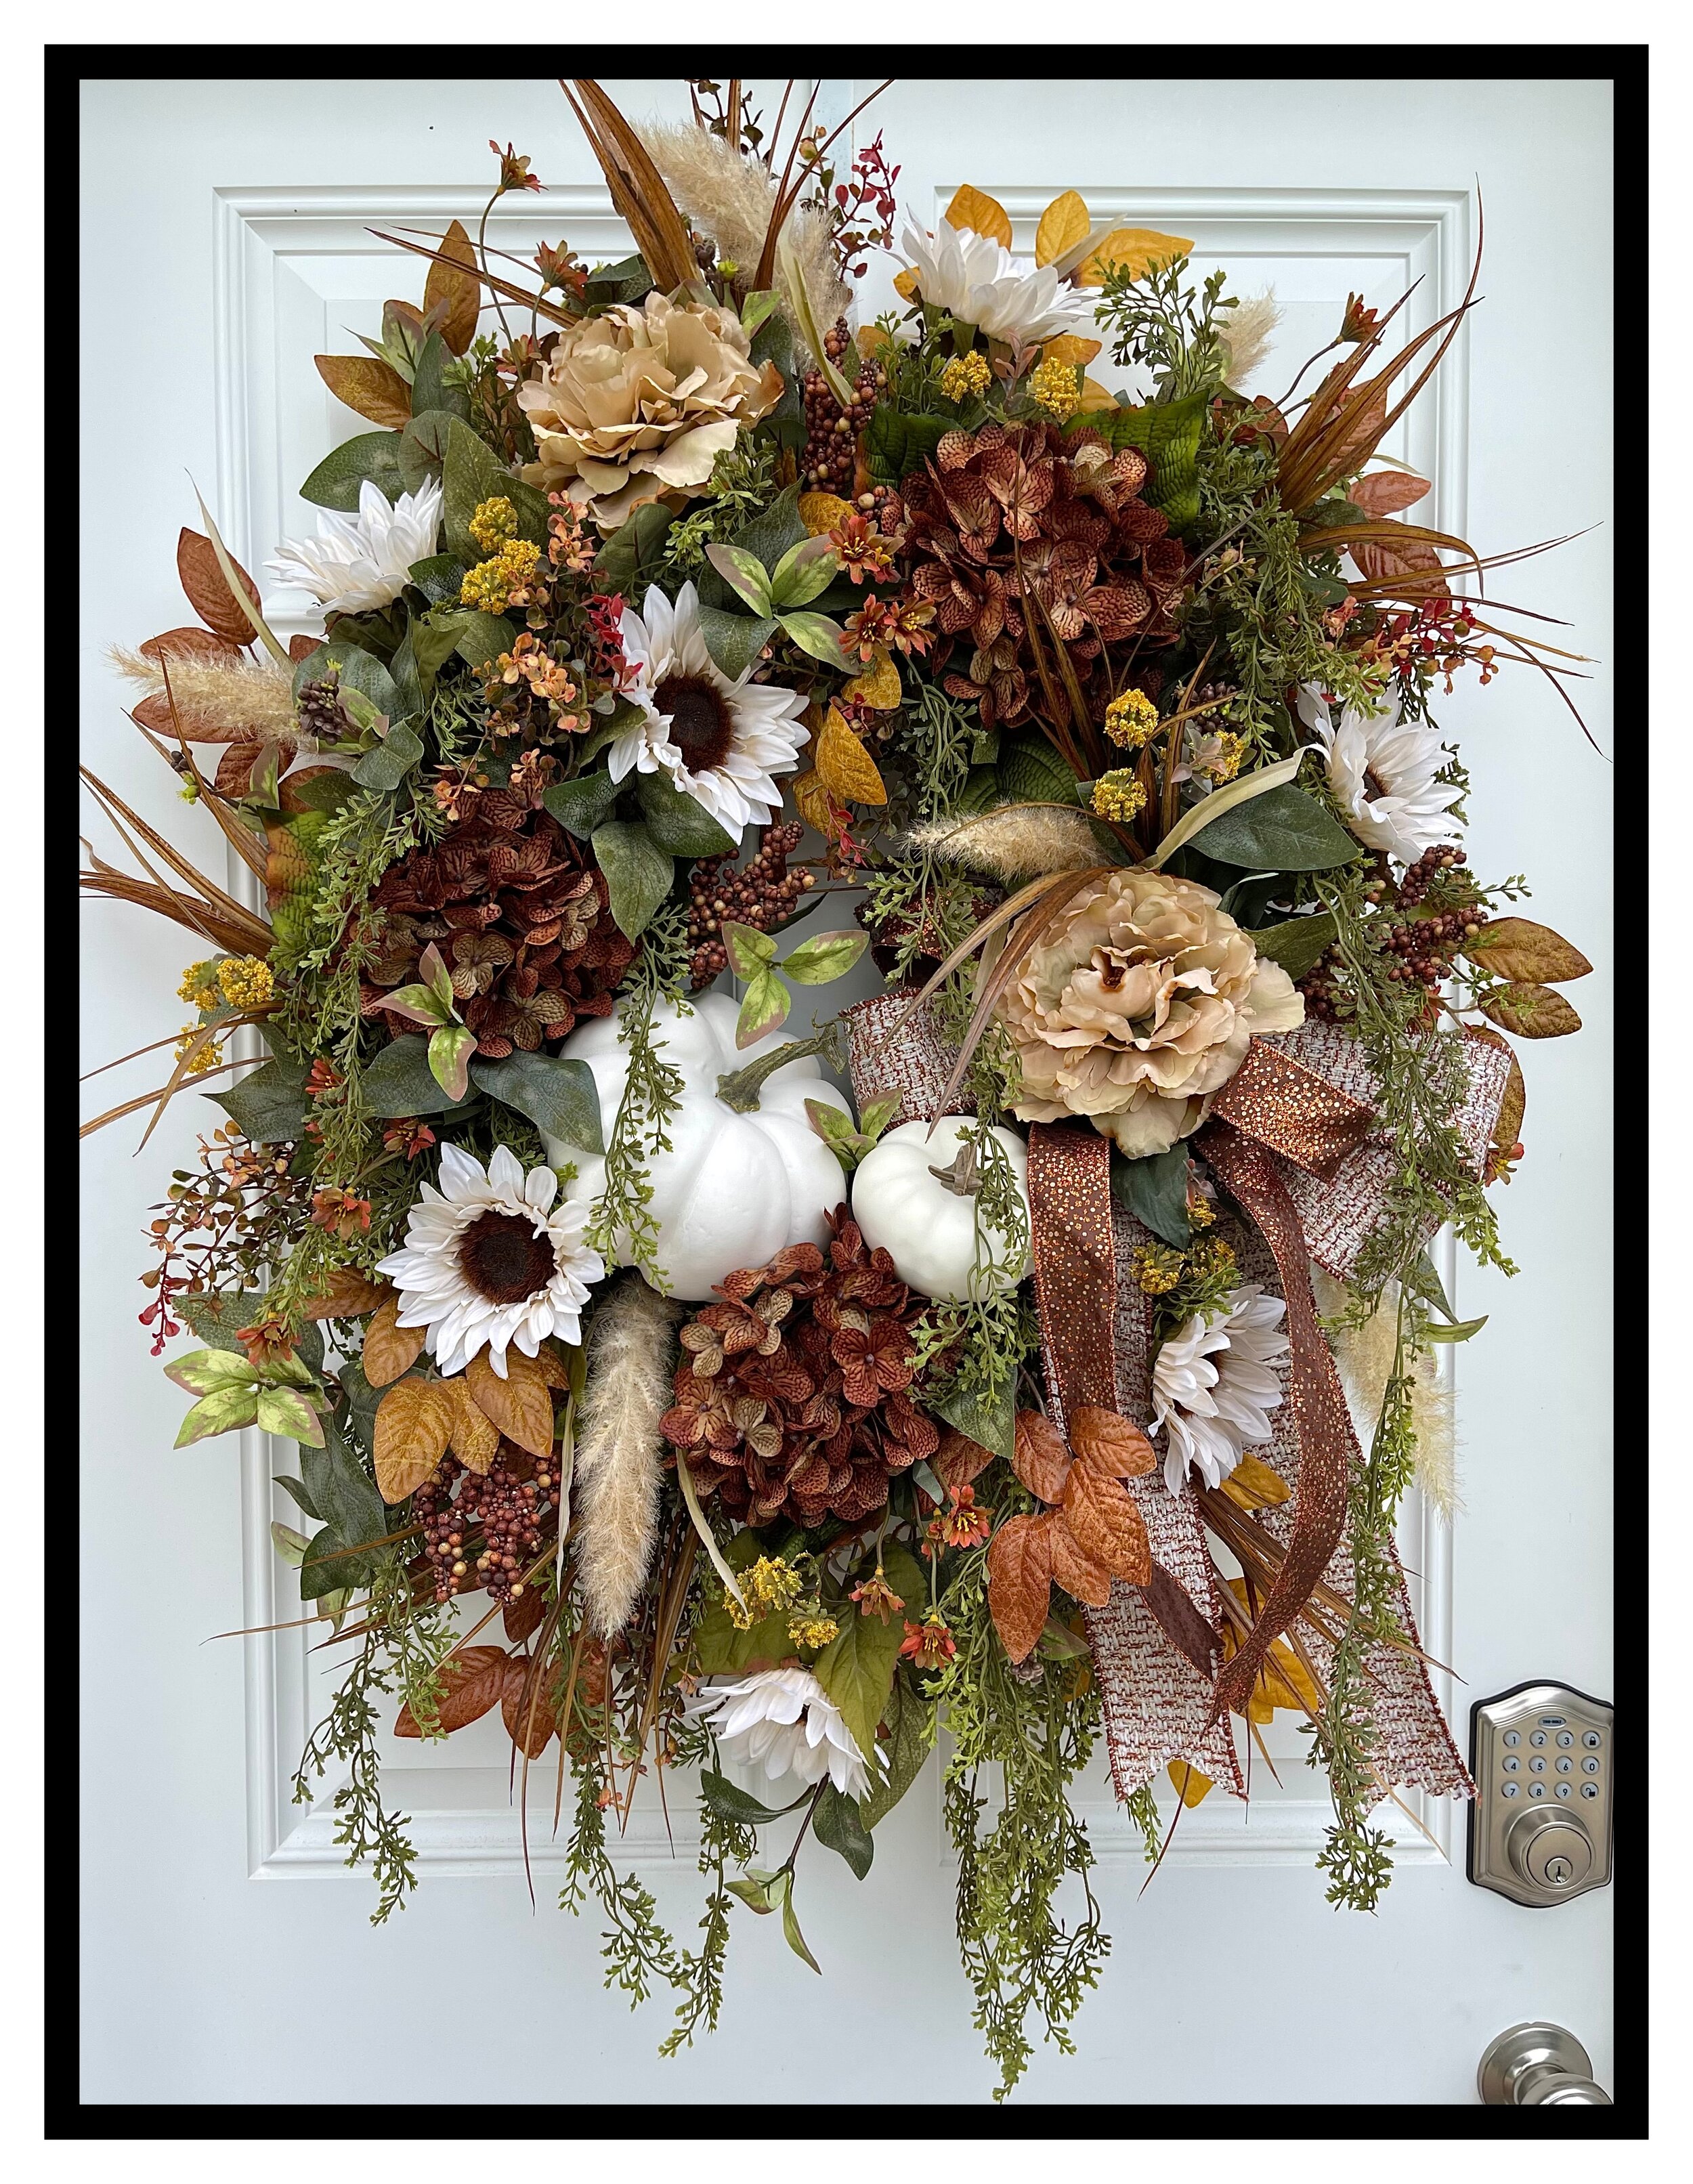 Fall Wreath for Front Door Large Fall Wreath Fall Wreath with Pumpkins Fall Peony Fall Wreath Harvest Wreath Fall Pumpkin Wreath